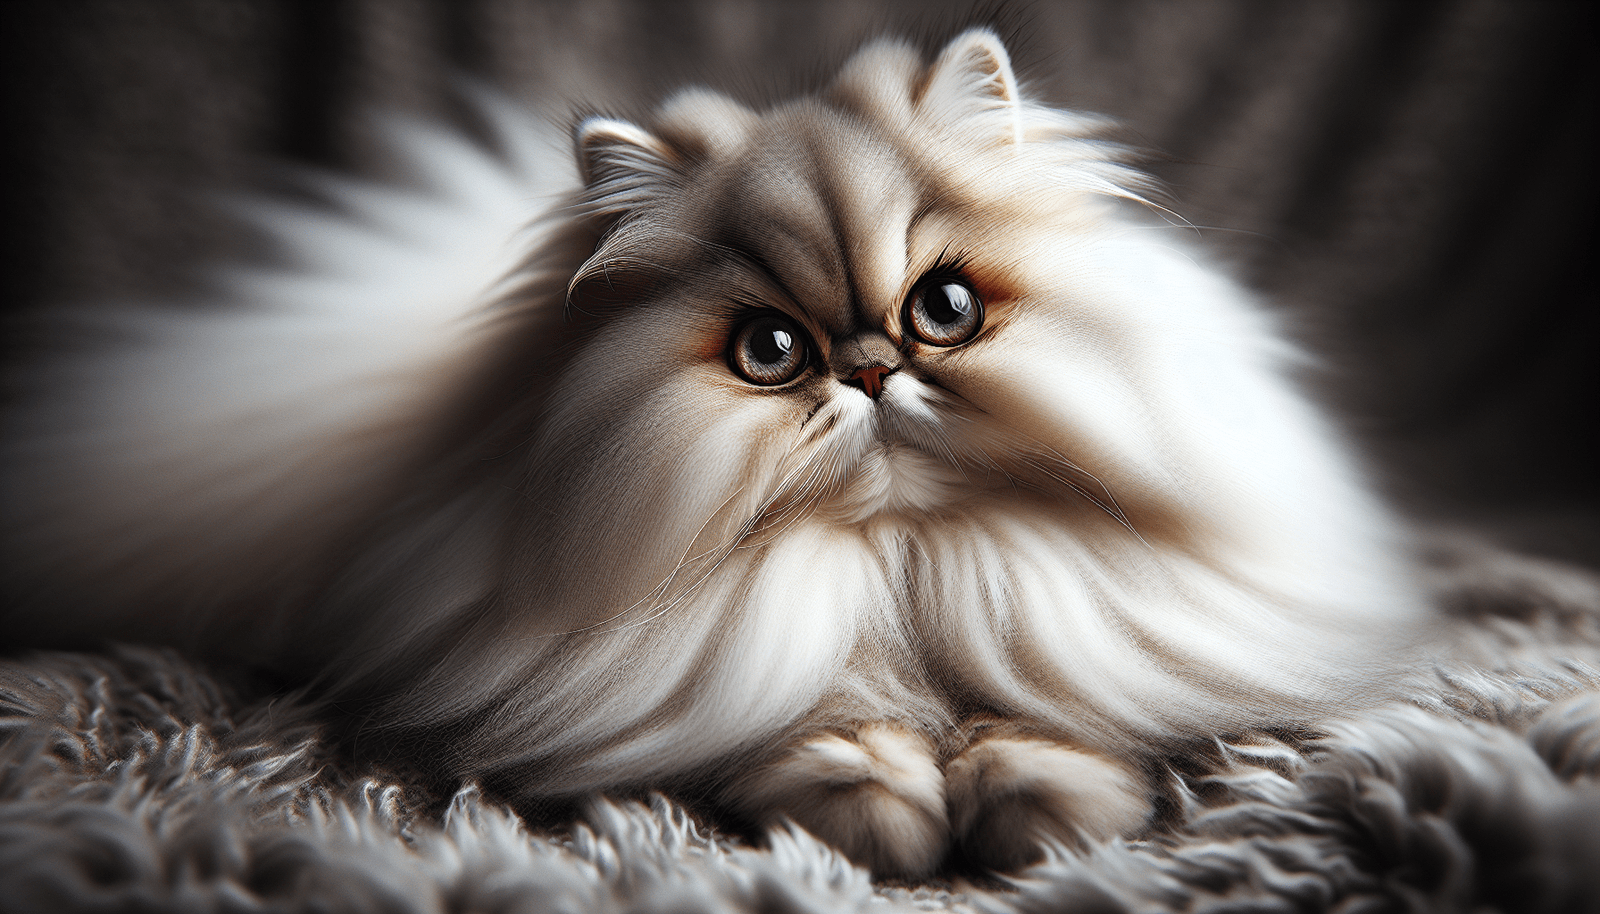 How Much Does a Chinchilla Persian Cat Cost?